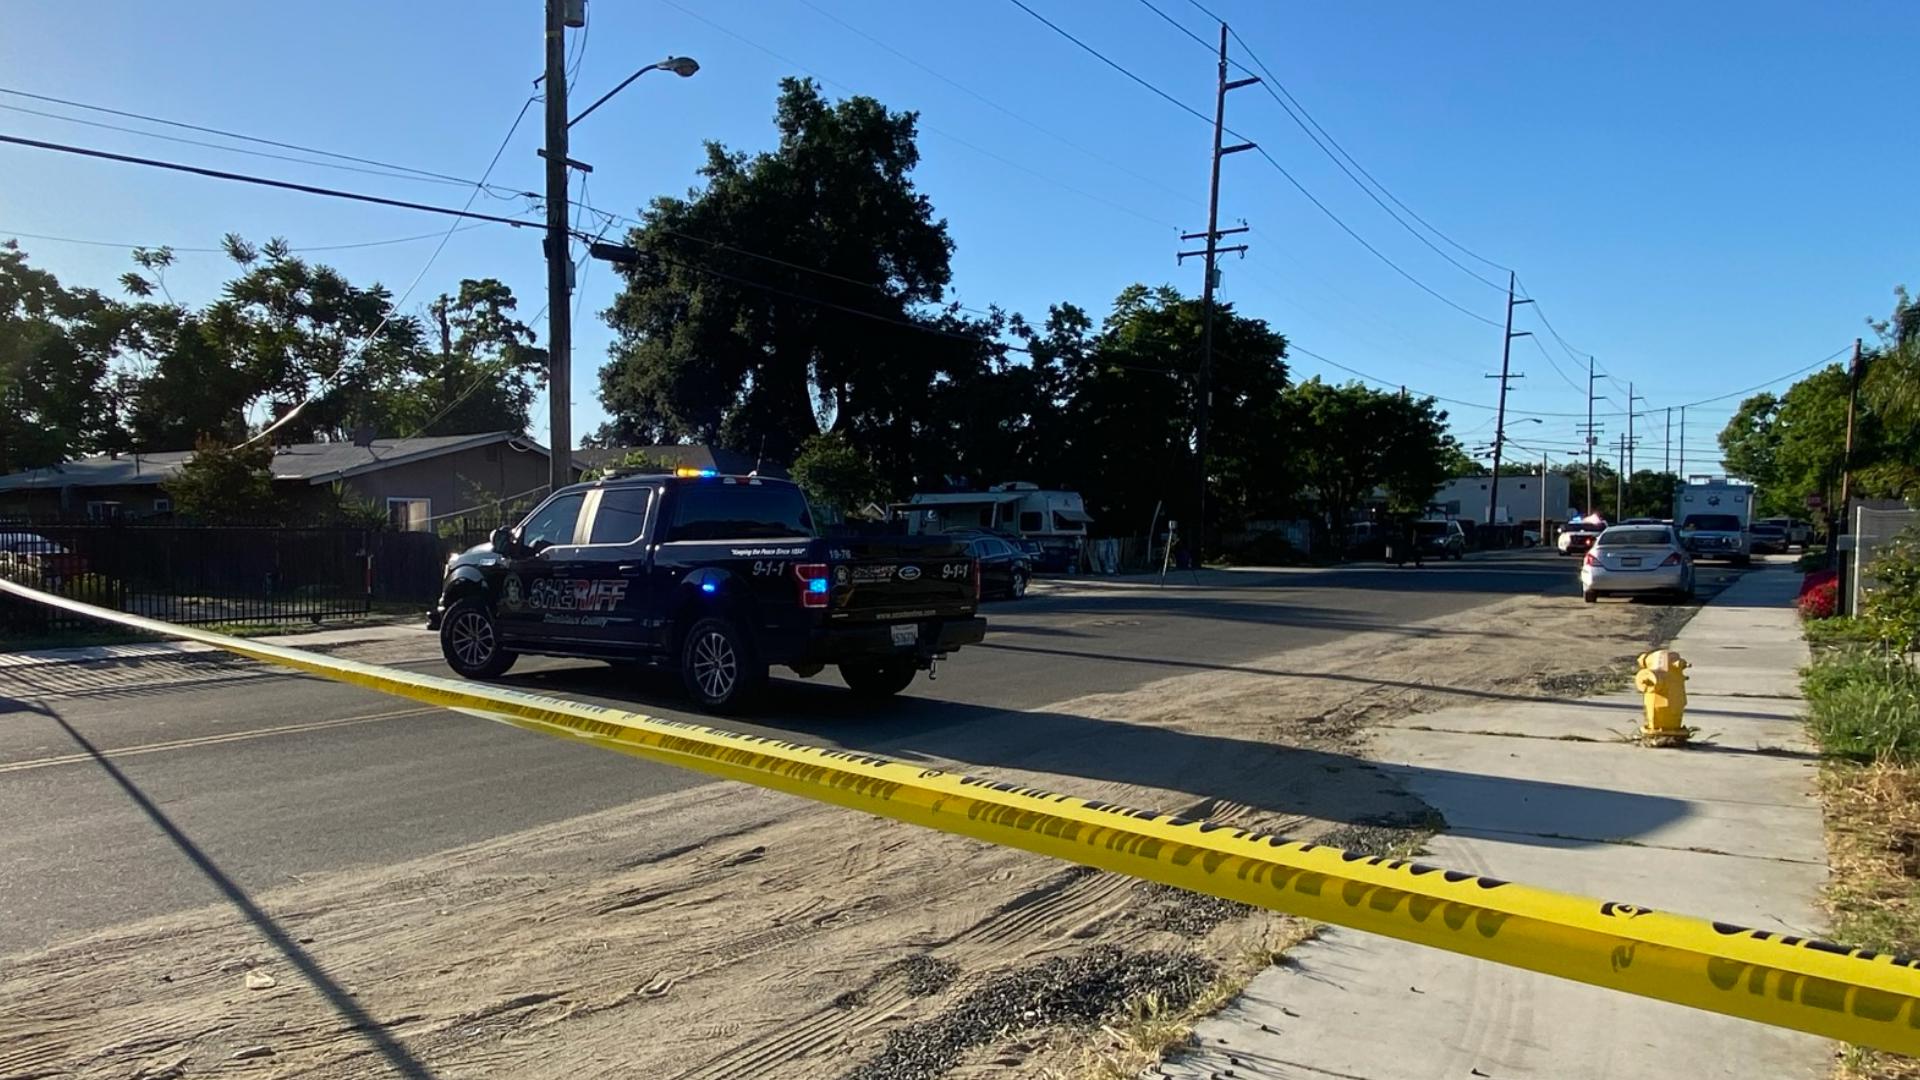 Officials say they were called to the 400 block of Kerr Avenue just after 3 p.m. on reports of a "verbal argument and shots fired."